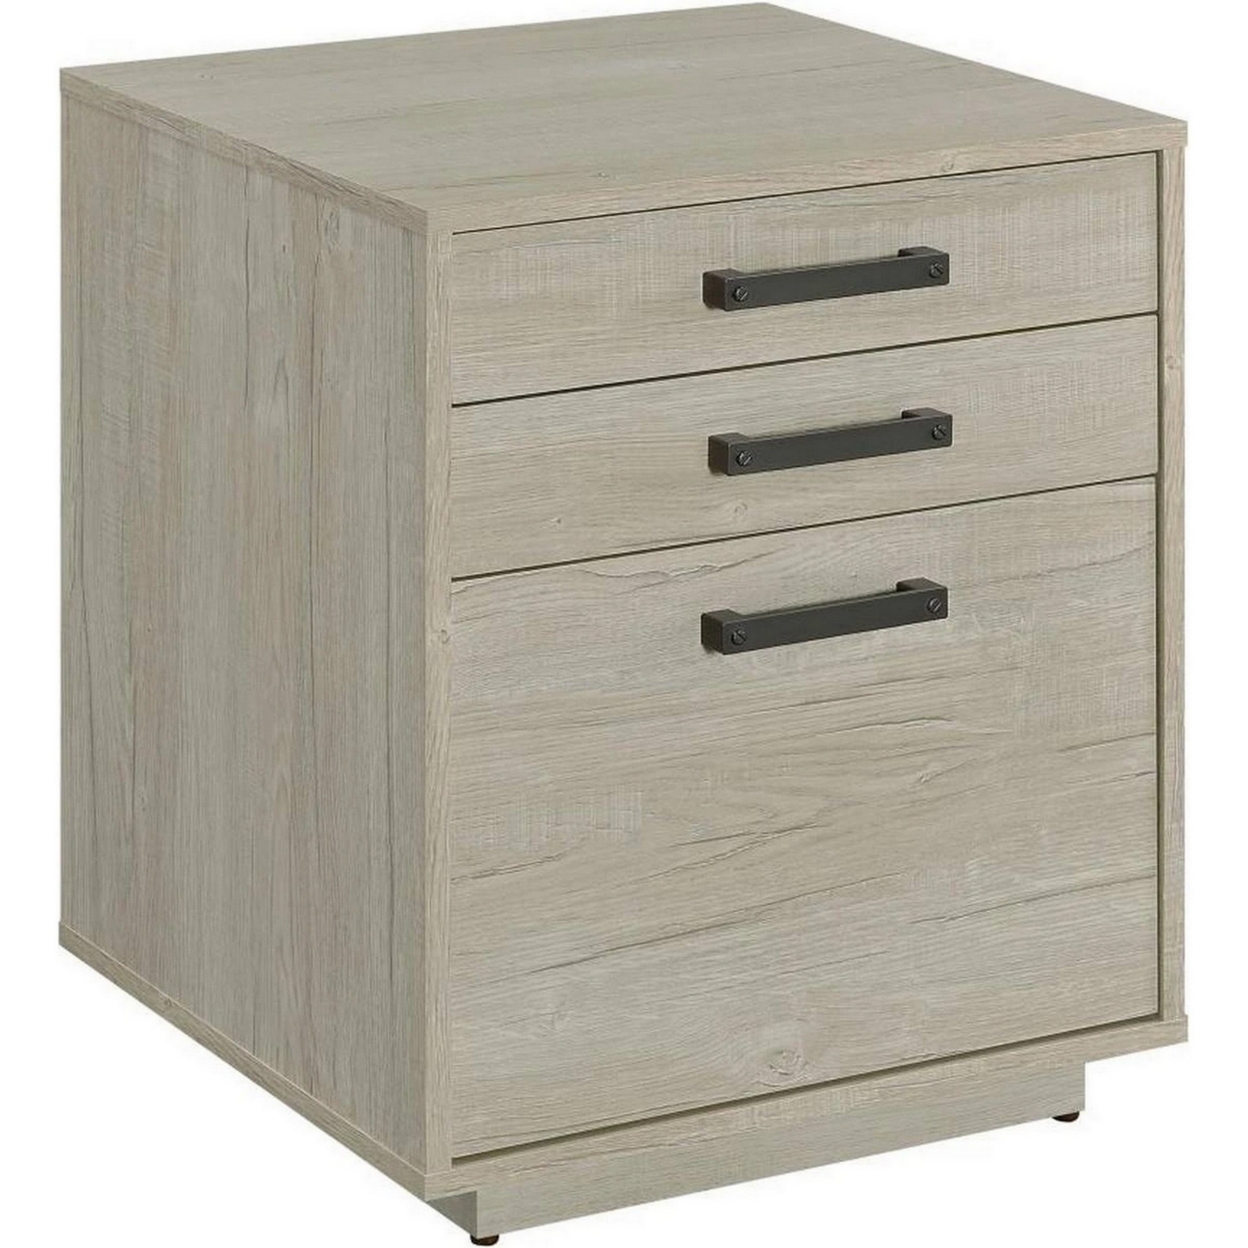 25 Inch Slim File Cabinet, 3 Gliding Drawers, Whitewashed Gray Wood Frame